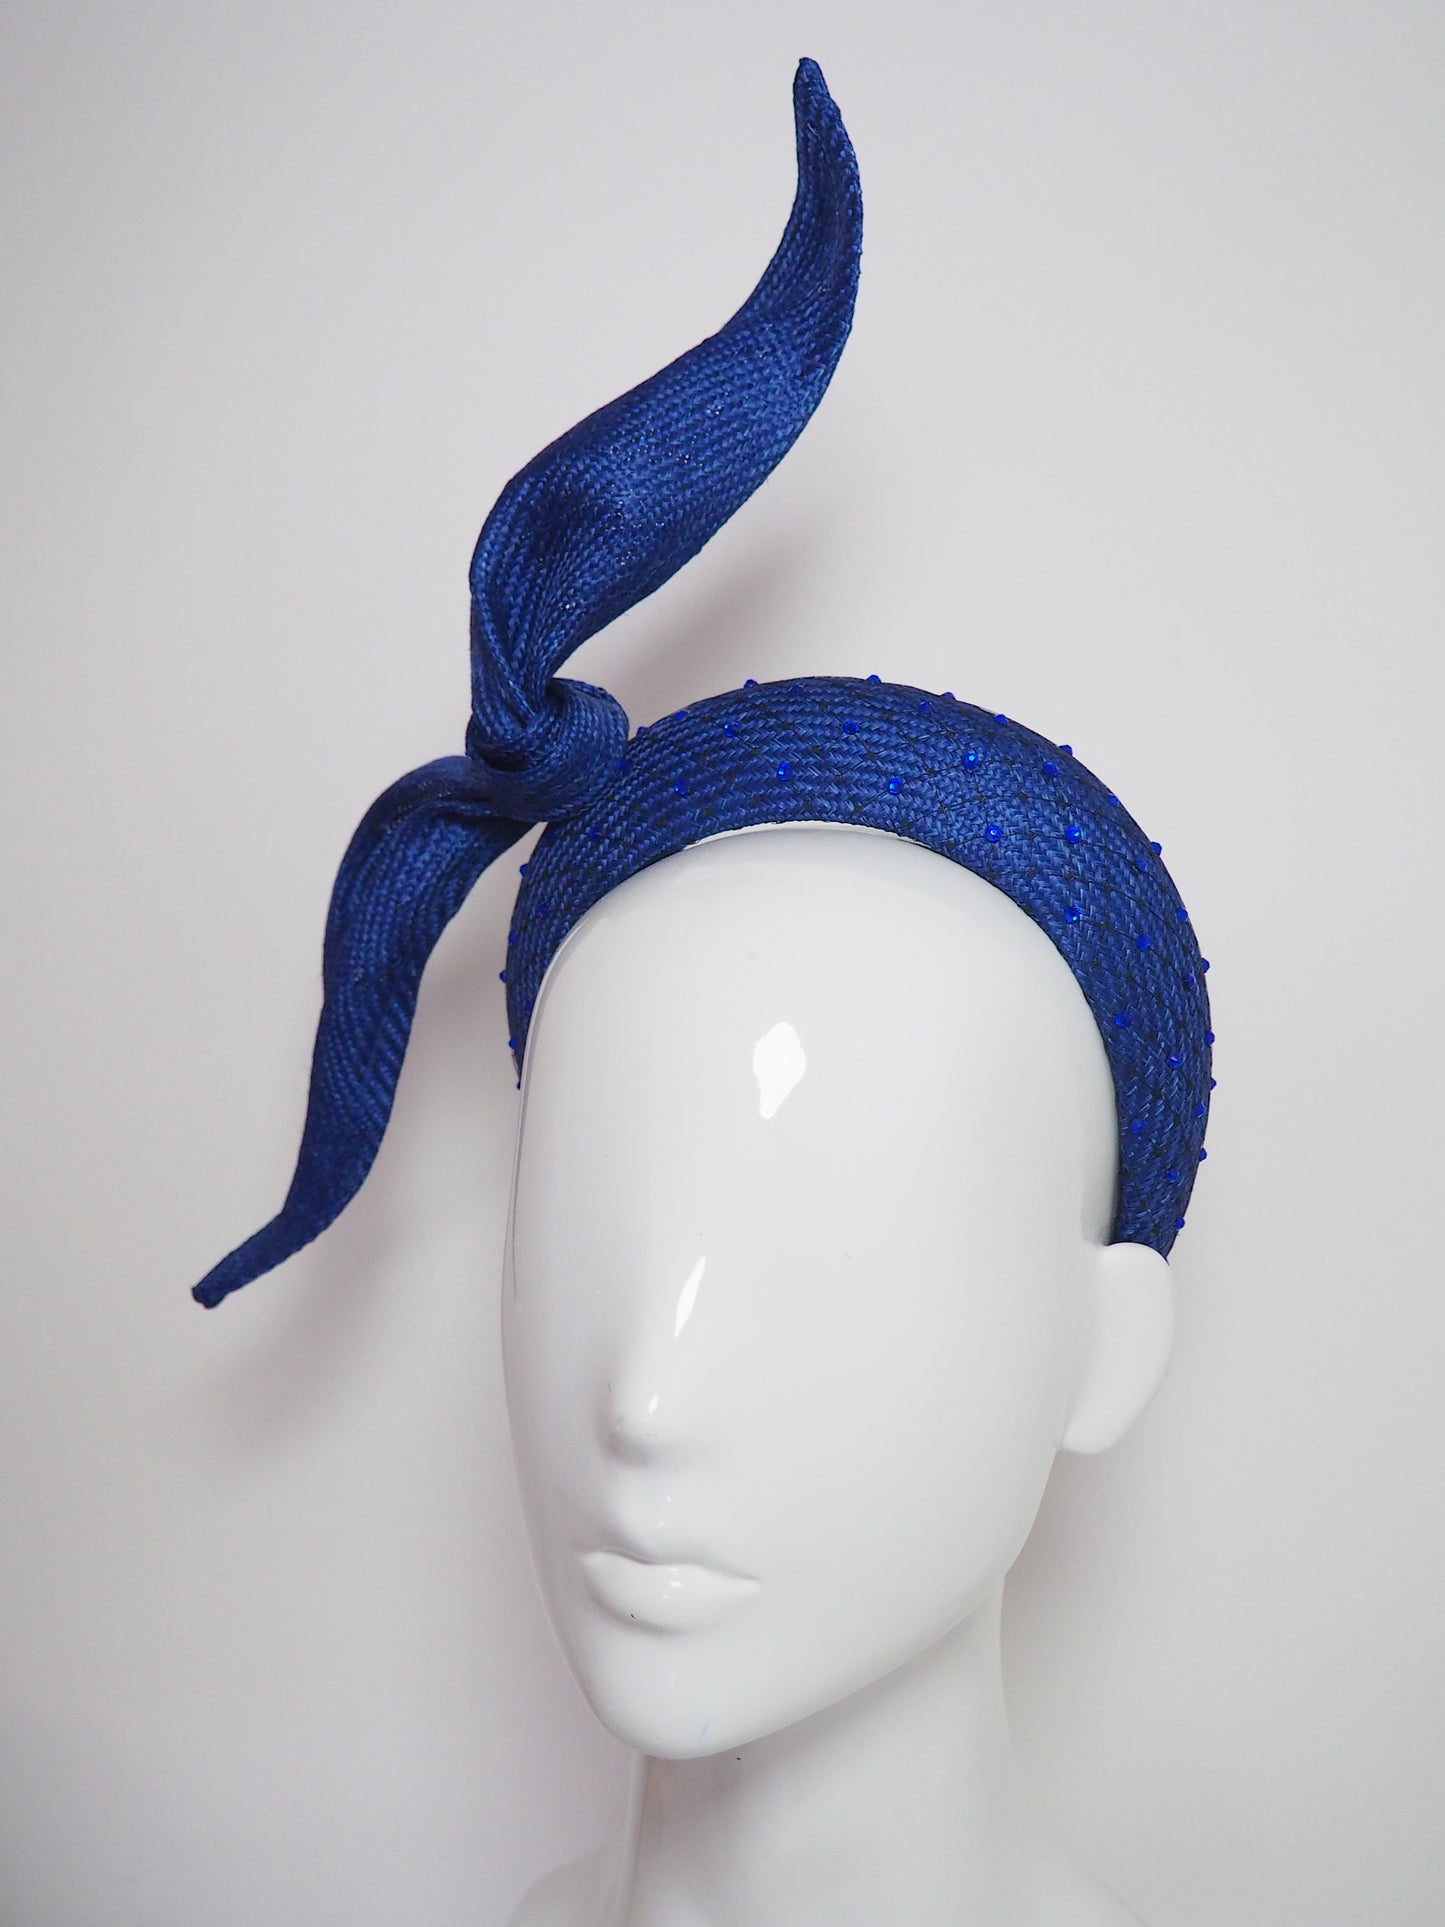 Tied in a knot - Deep blue with sapphire blue crystals and black veil